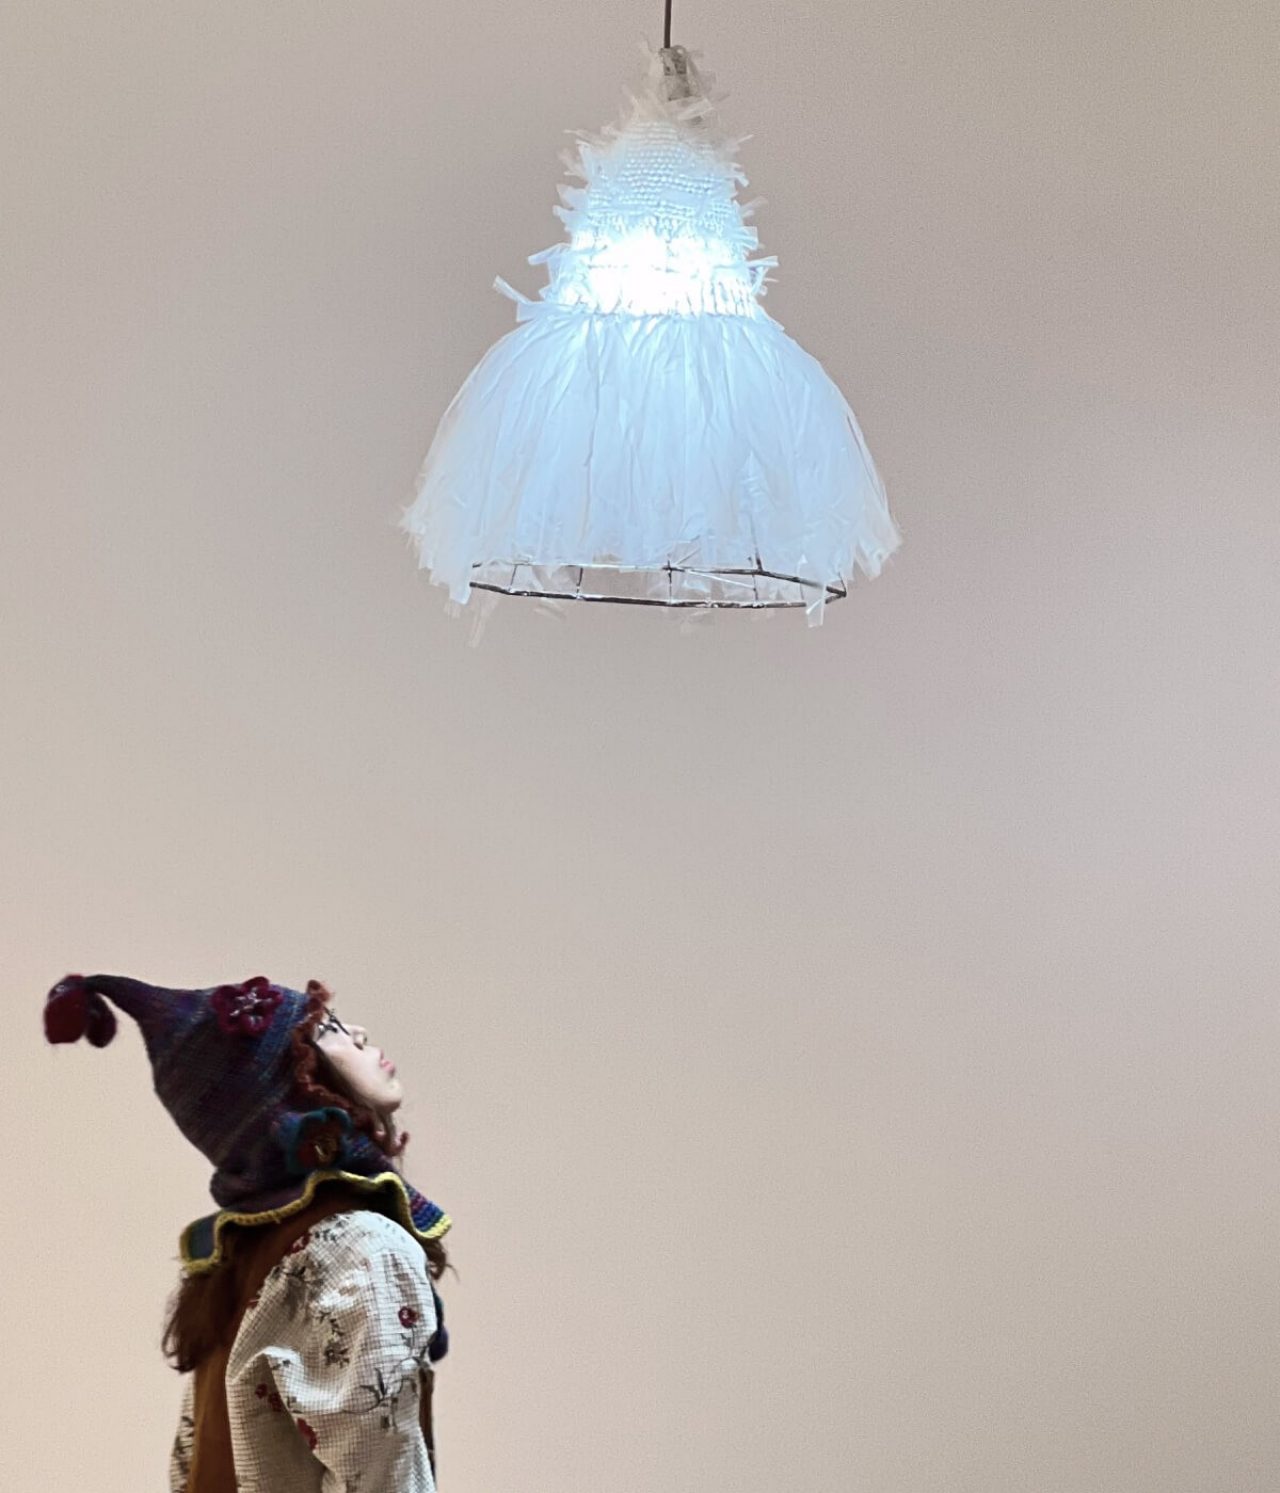 Chenyang gazes up to the art piece which takes on the form of a light shade. The shade is not dissimilar to the appearance of a white dress made of thin net-like material.